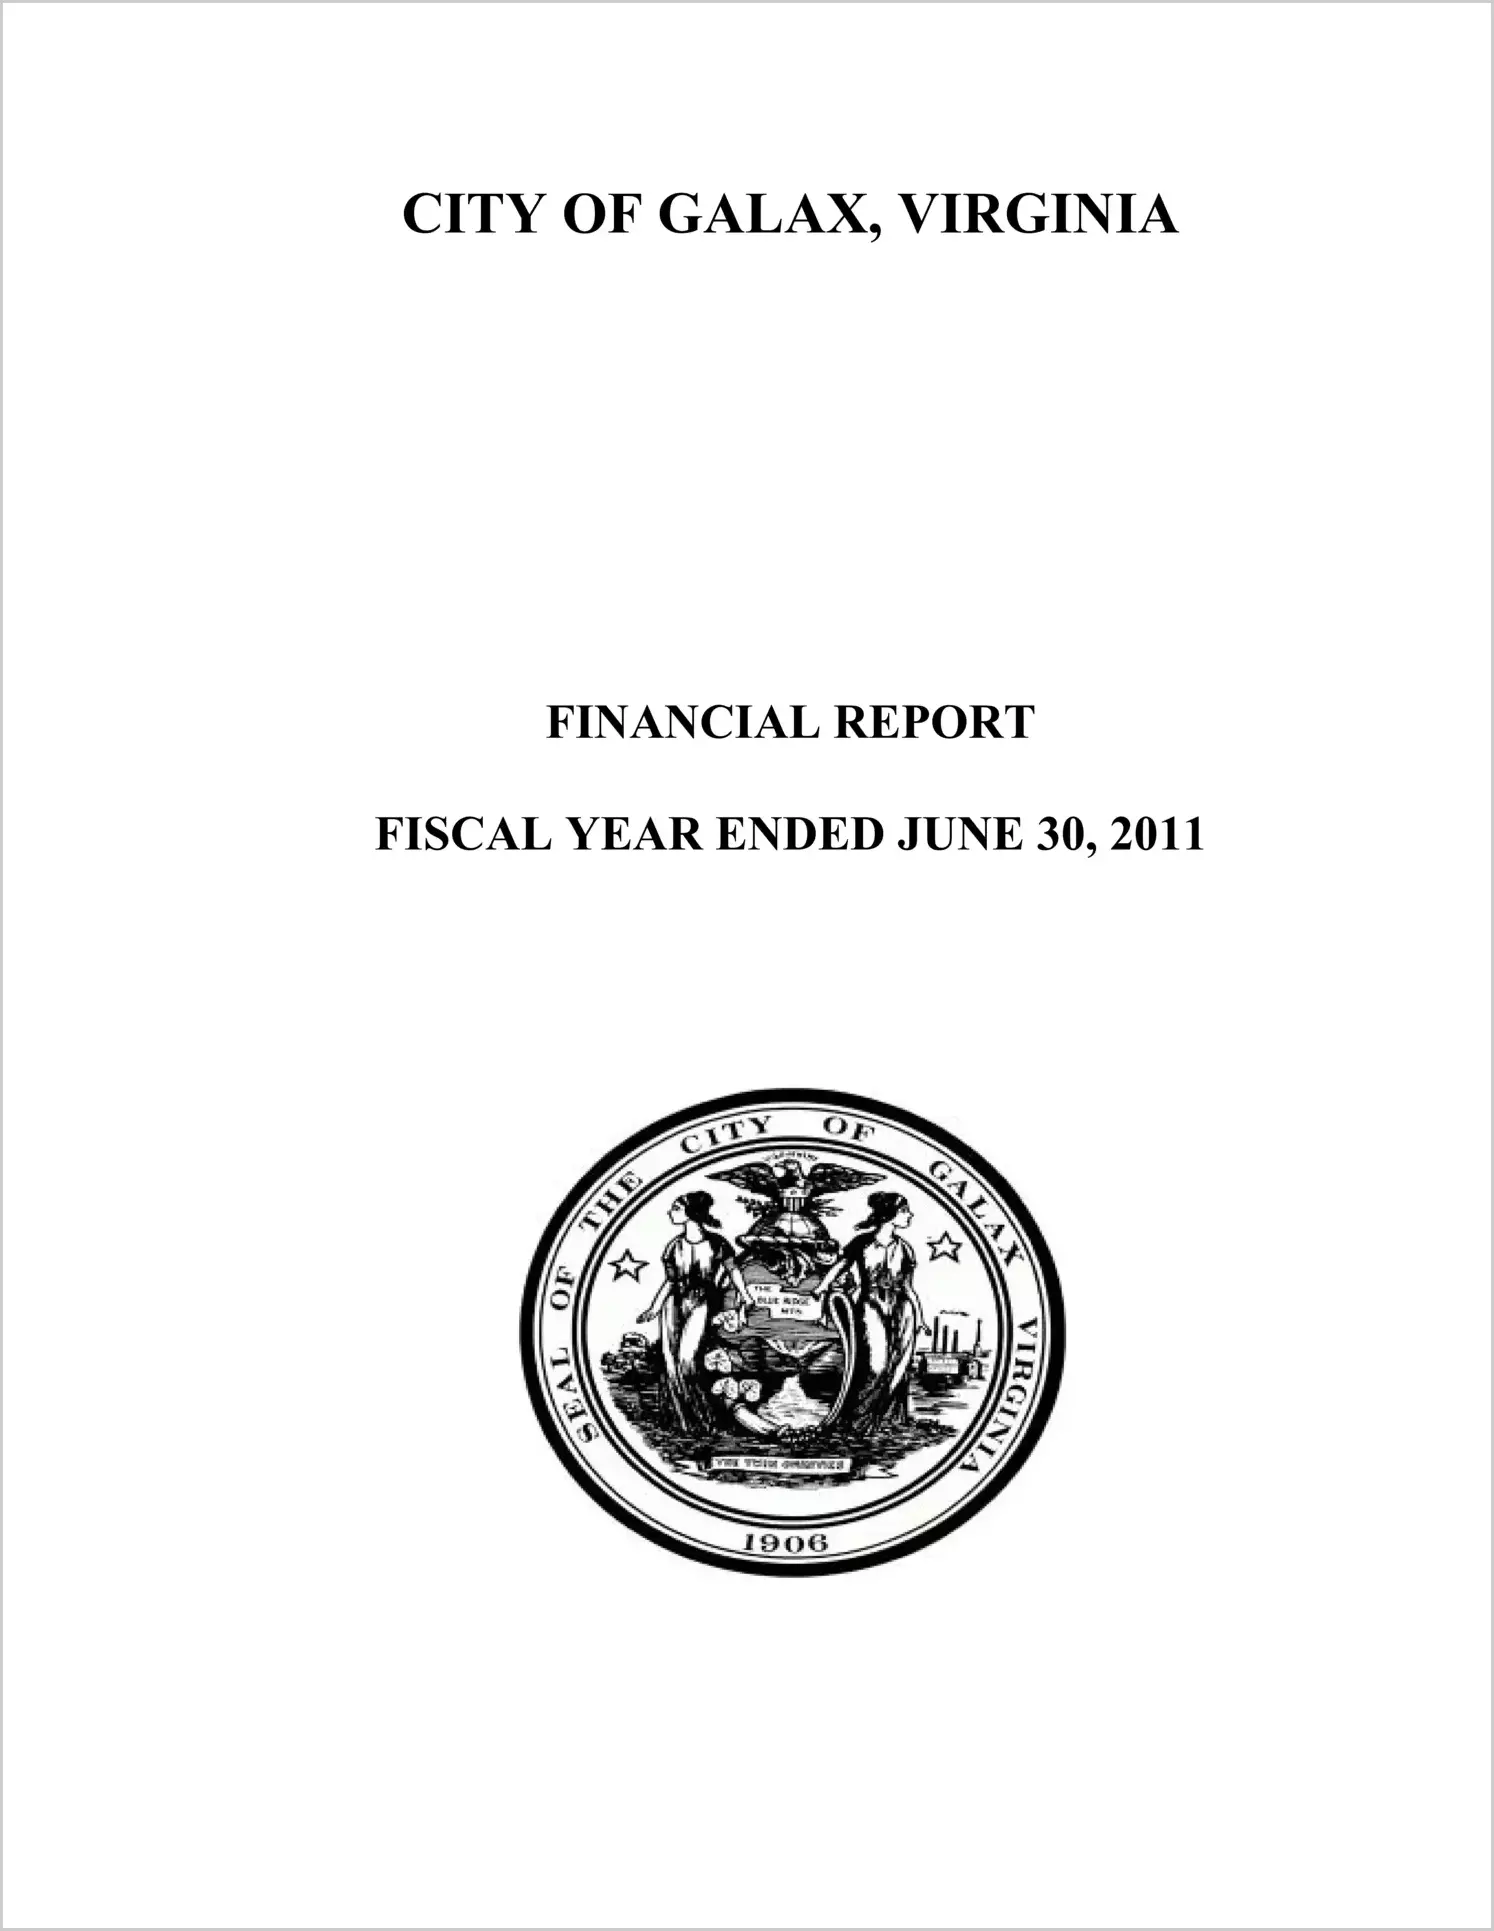 2011 Annual Financial Report for City of Galax